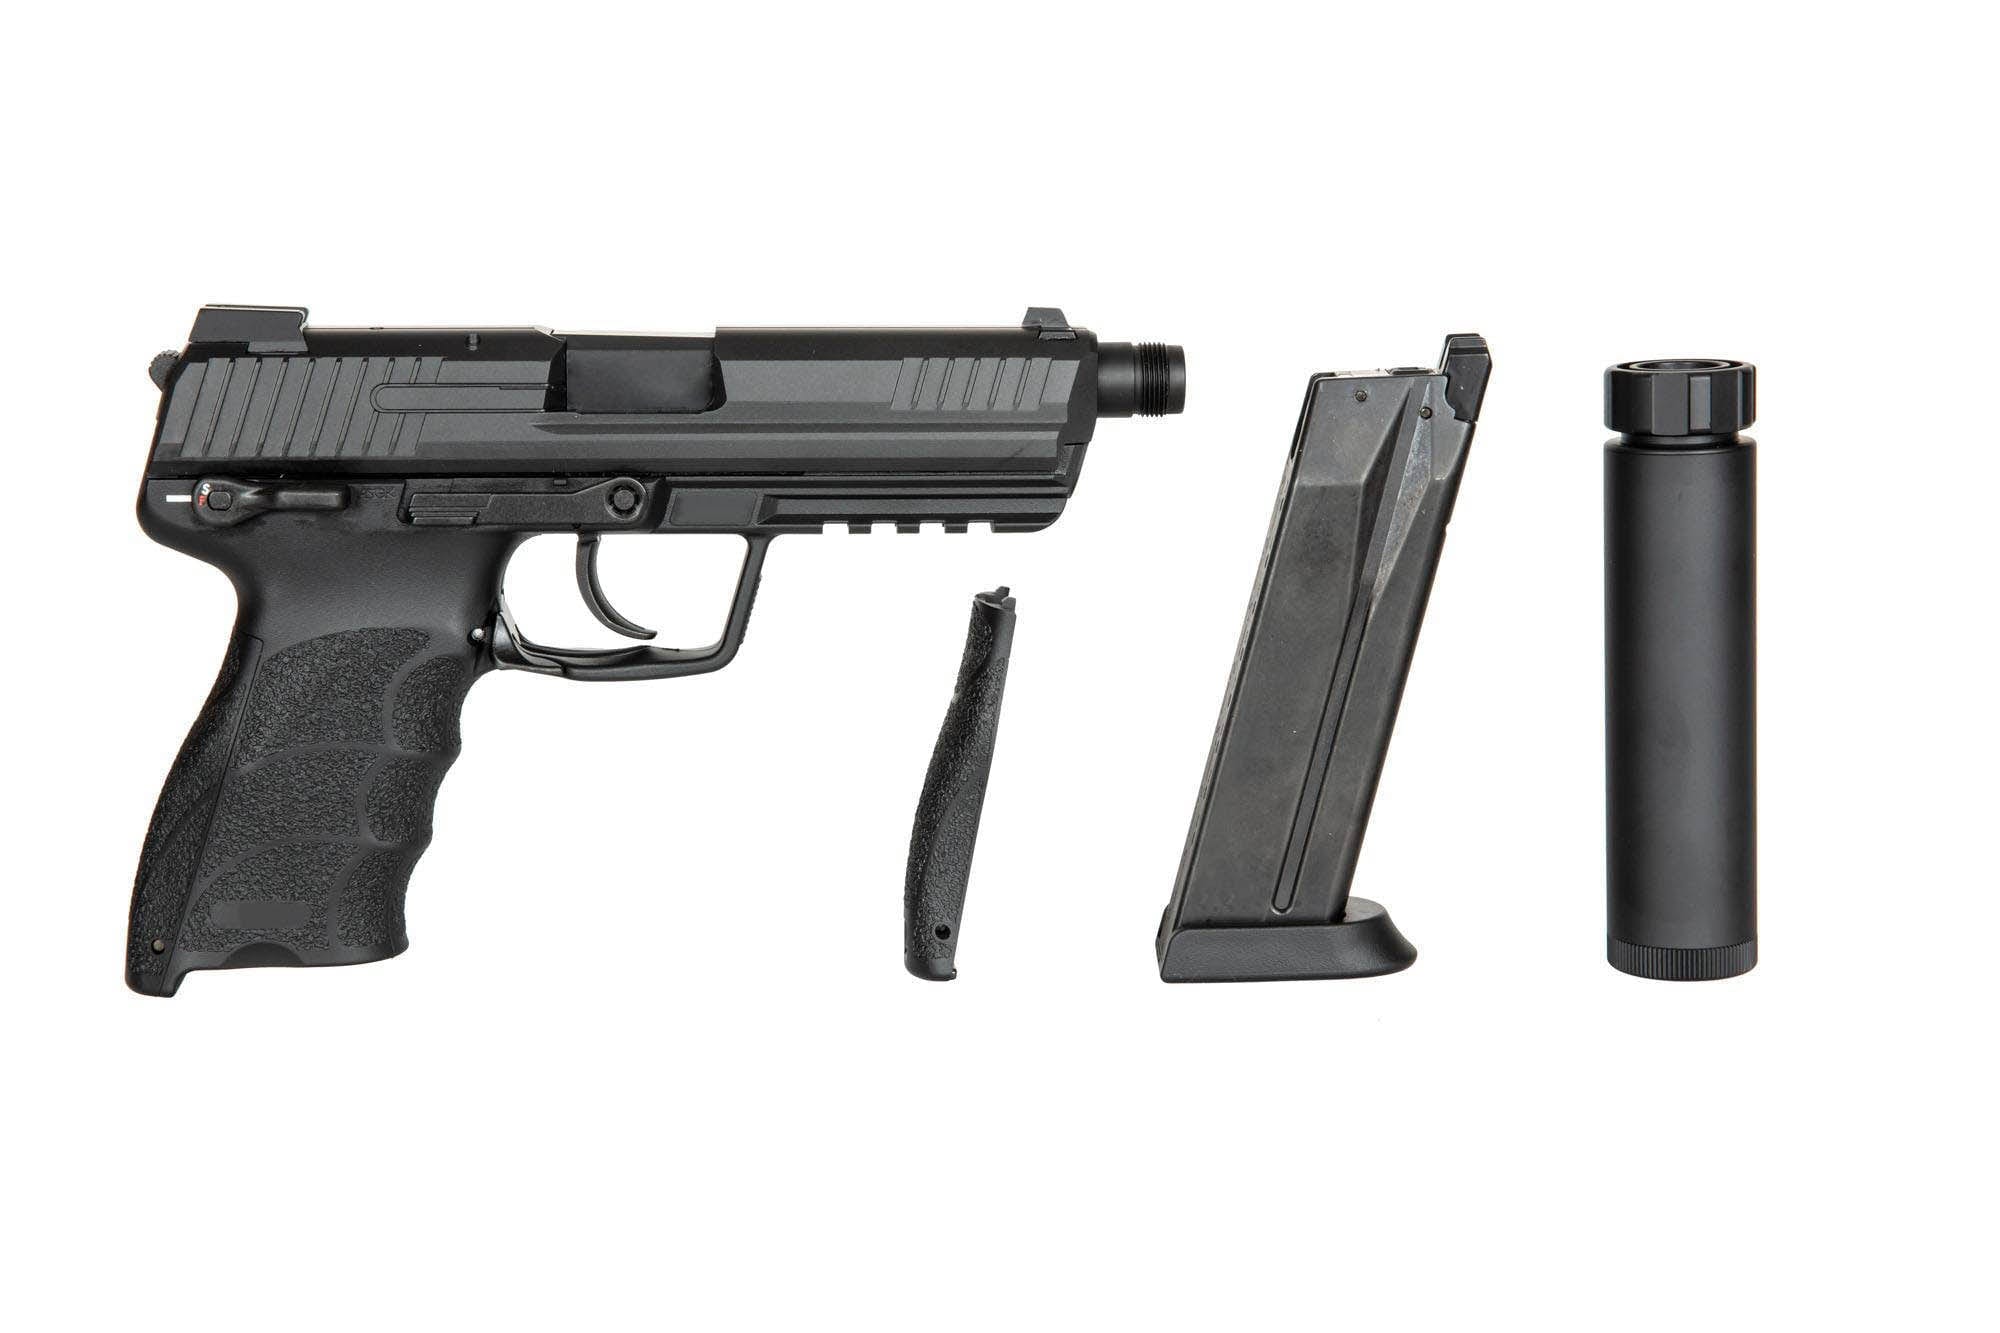 TM45 Tactical Pistol with Silencer Replica - Black by Tokyo Marui on Airsoft Mania Europe